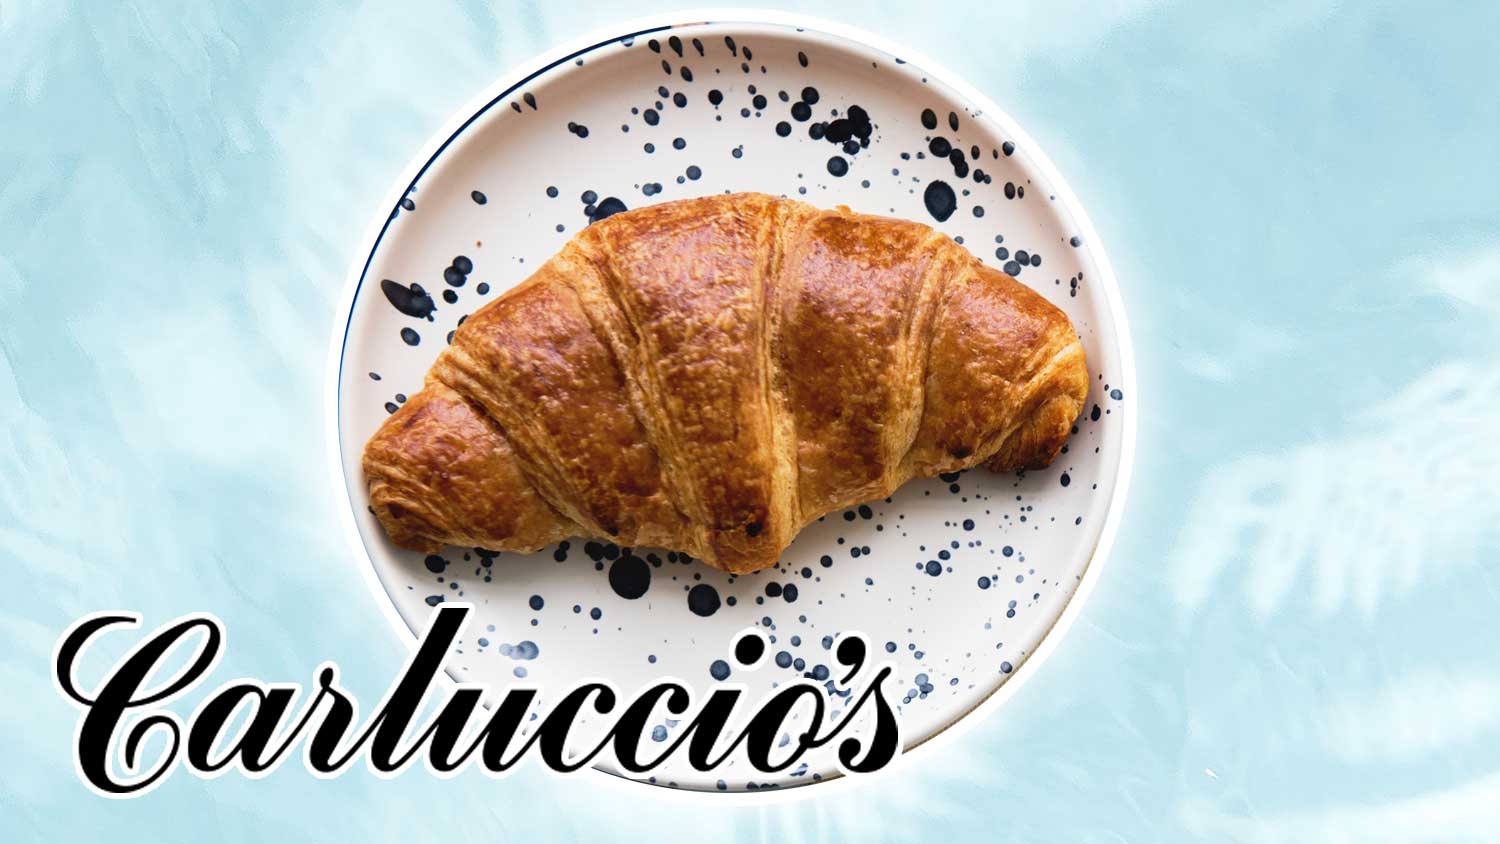 £1 Buttery Vegan Croissants Now At Carluccio’s